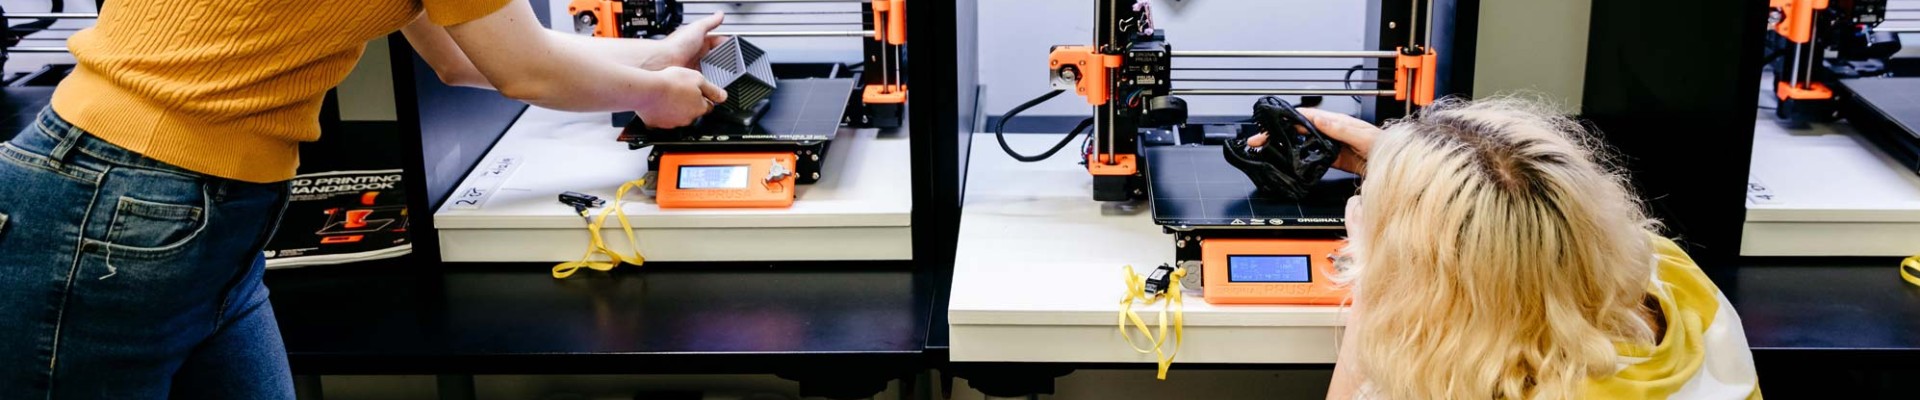 Two people using 3D printers in the Edge